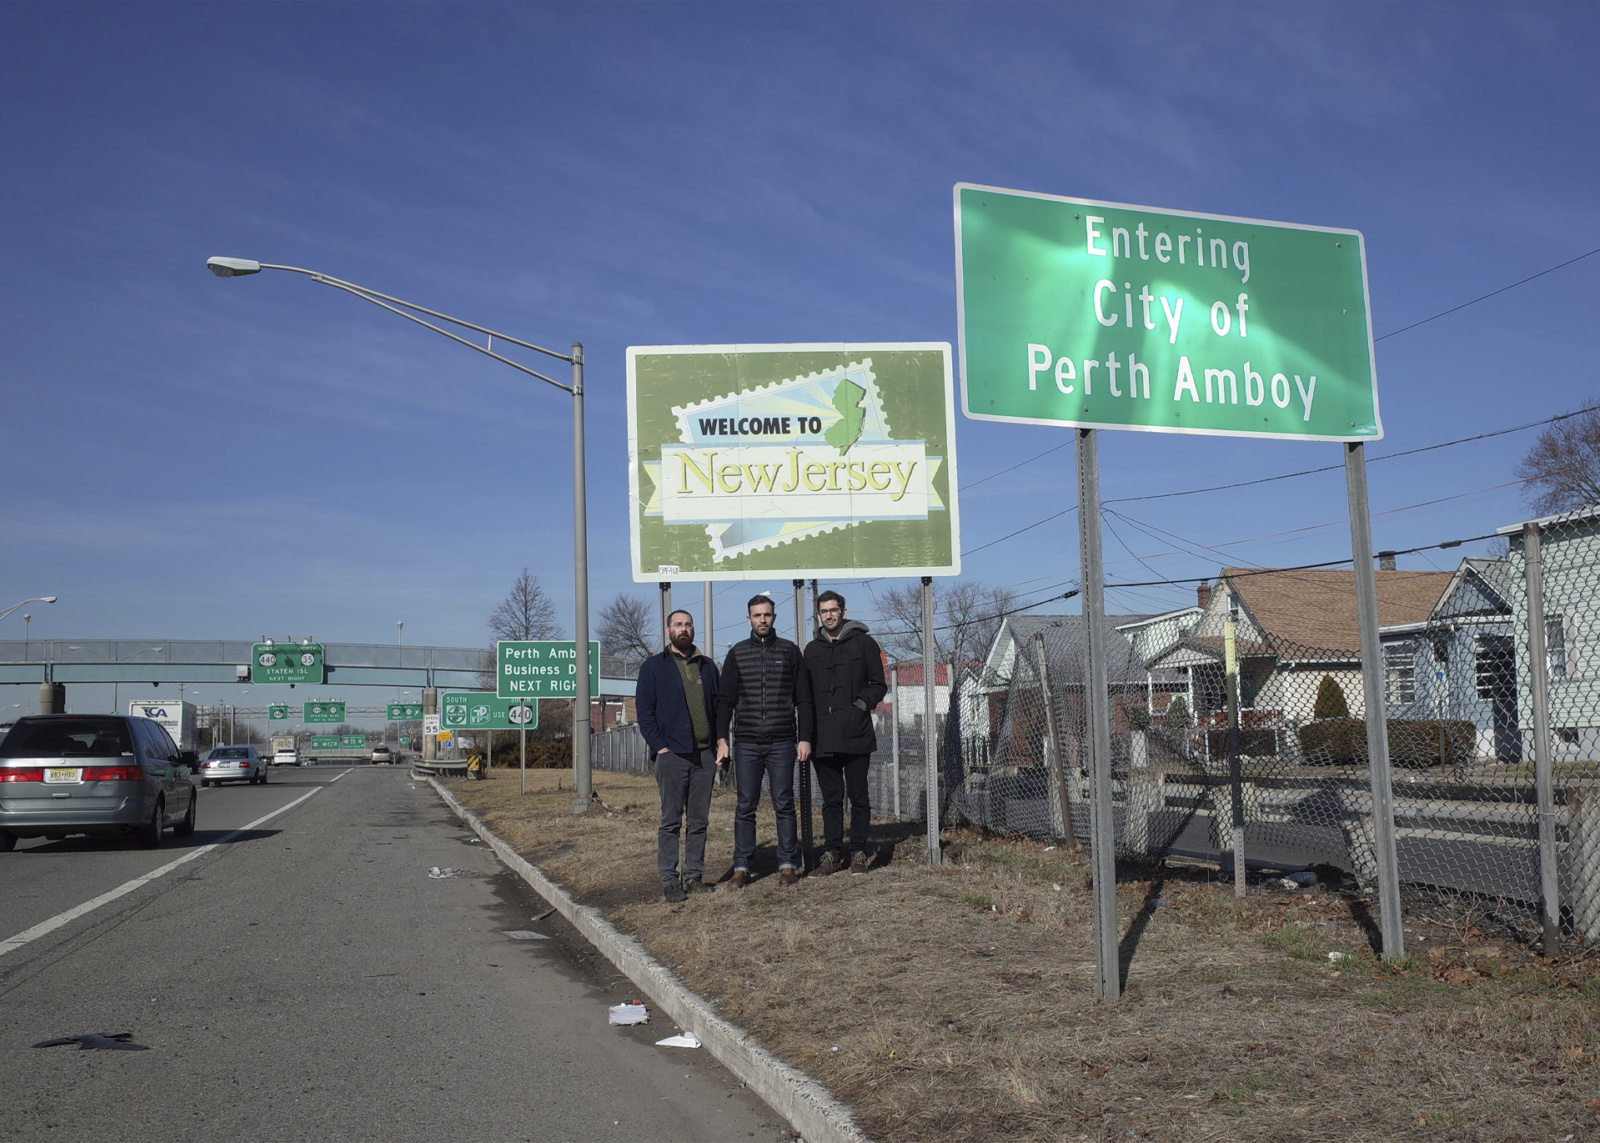 Ryan Waller, Gary Fogelson, and Phil Lubliner on Route 440 in New Jersey, 2018.